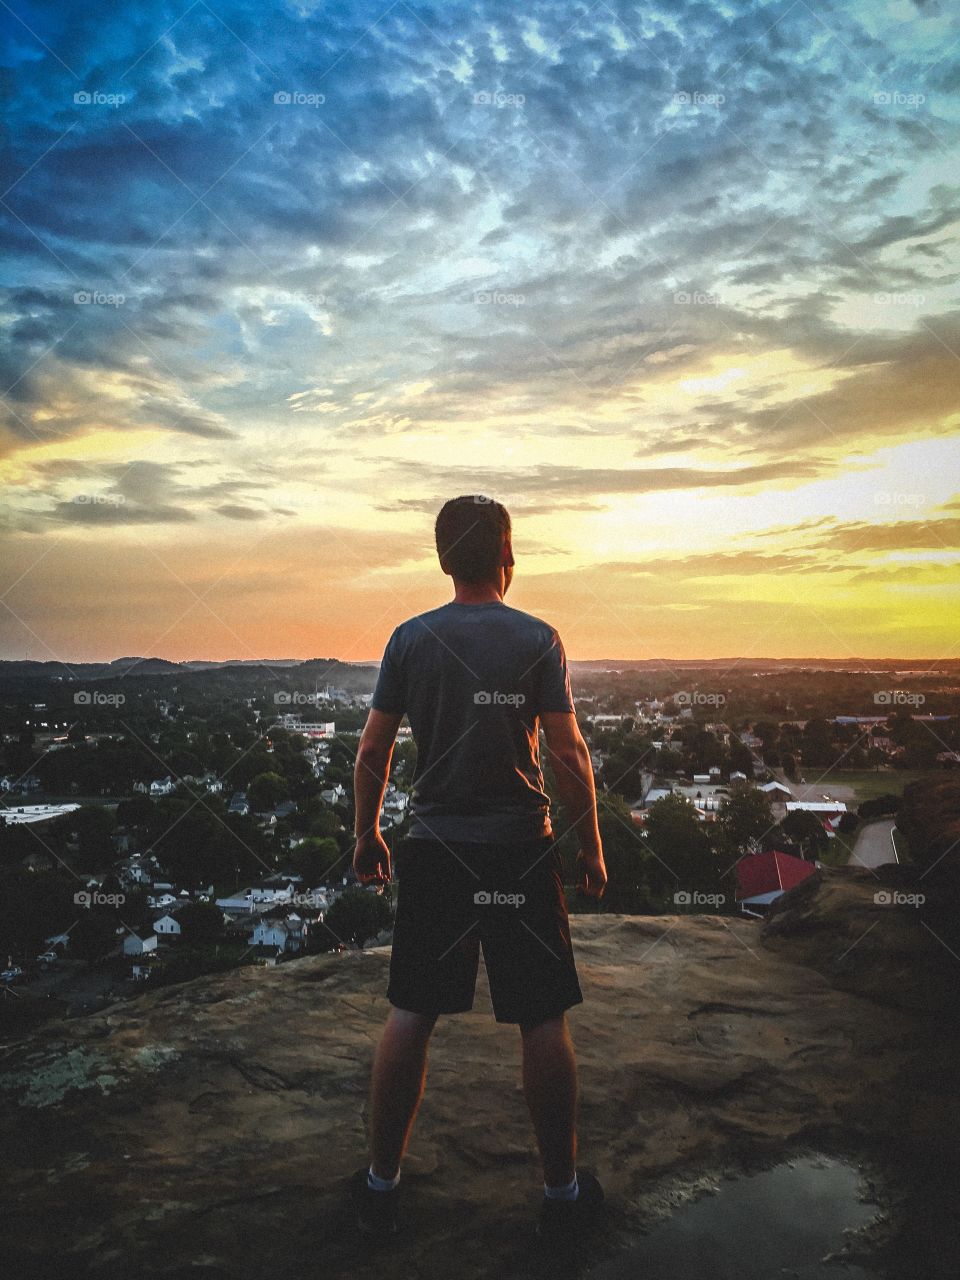 Awesome sunset with an awesome model on a mountain looking over the city!